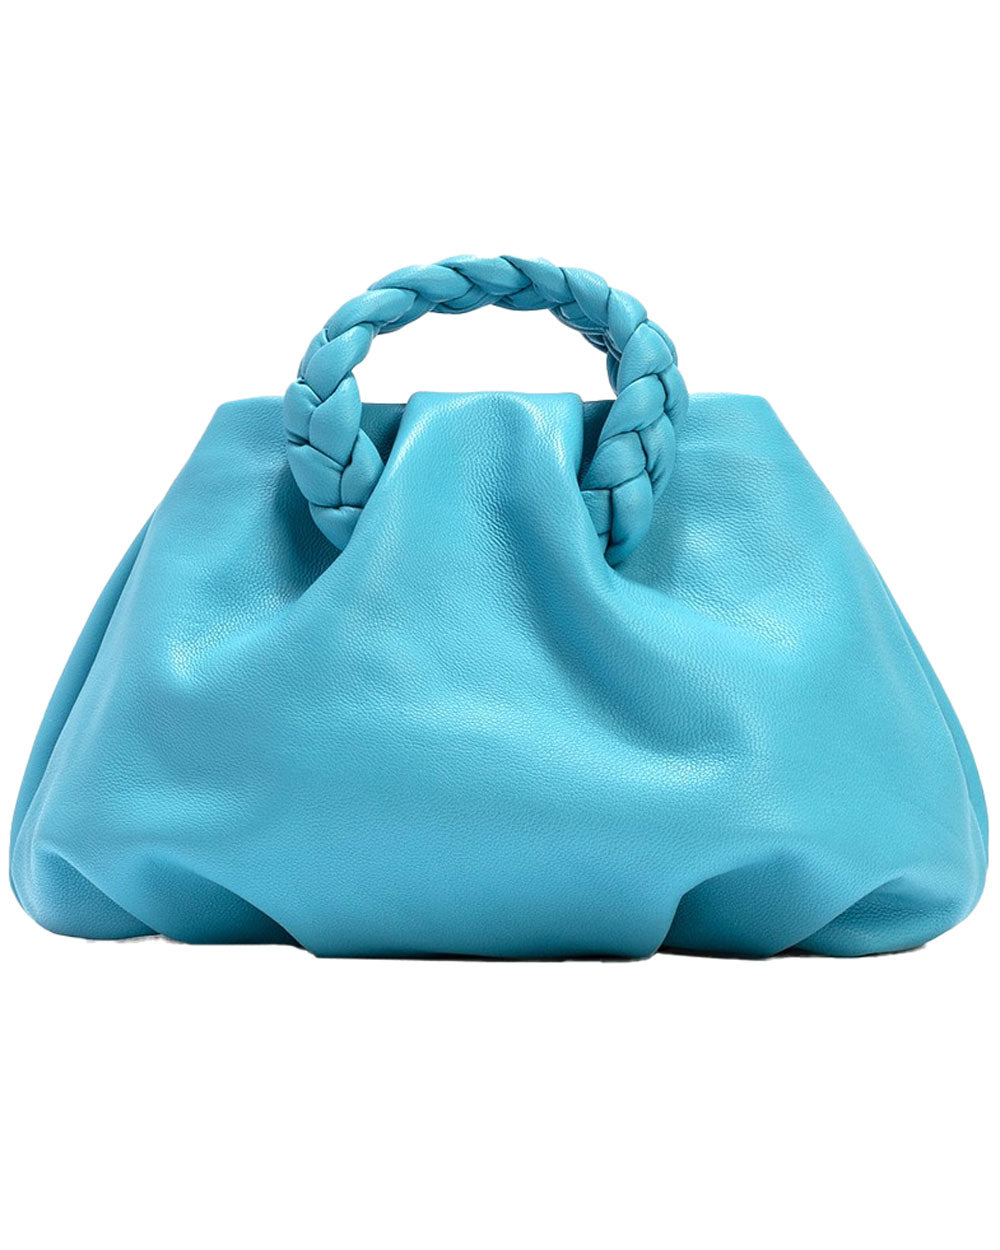 Bombon Small Leather Crossbody in Turquoise